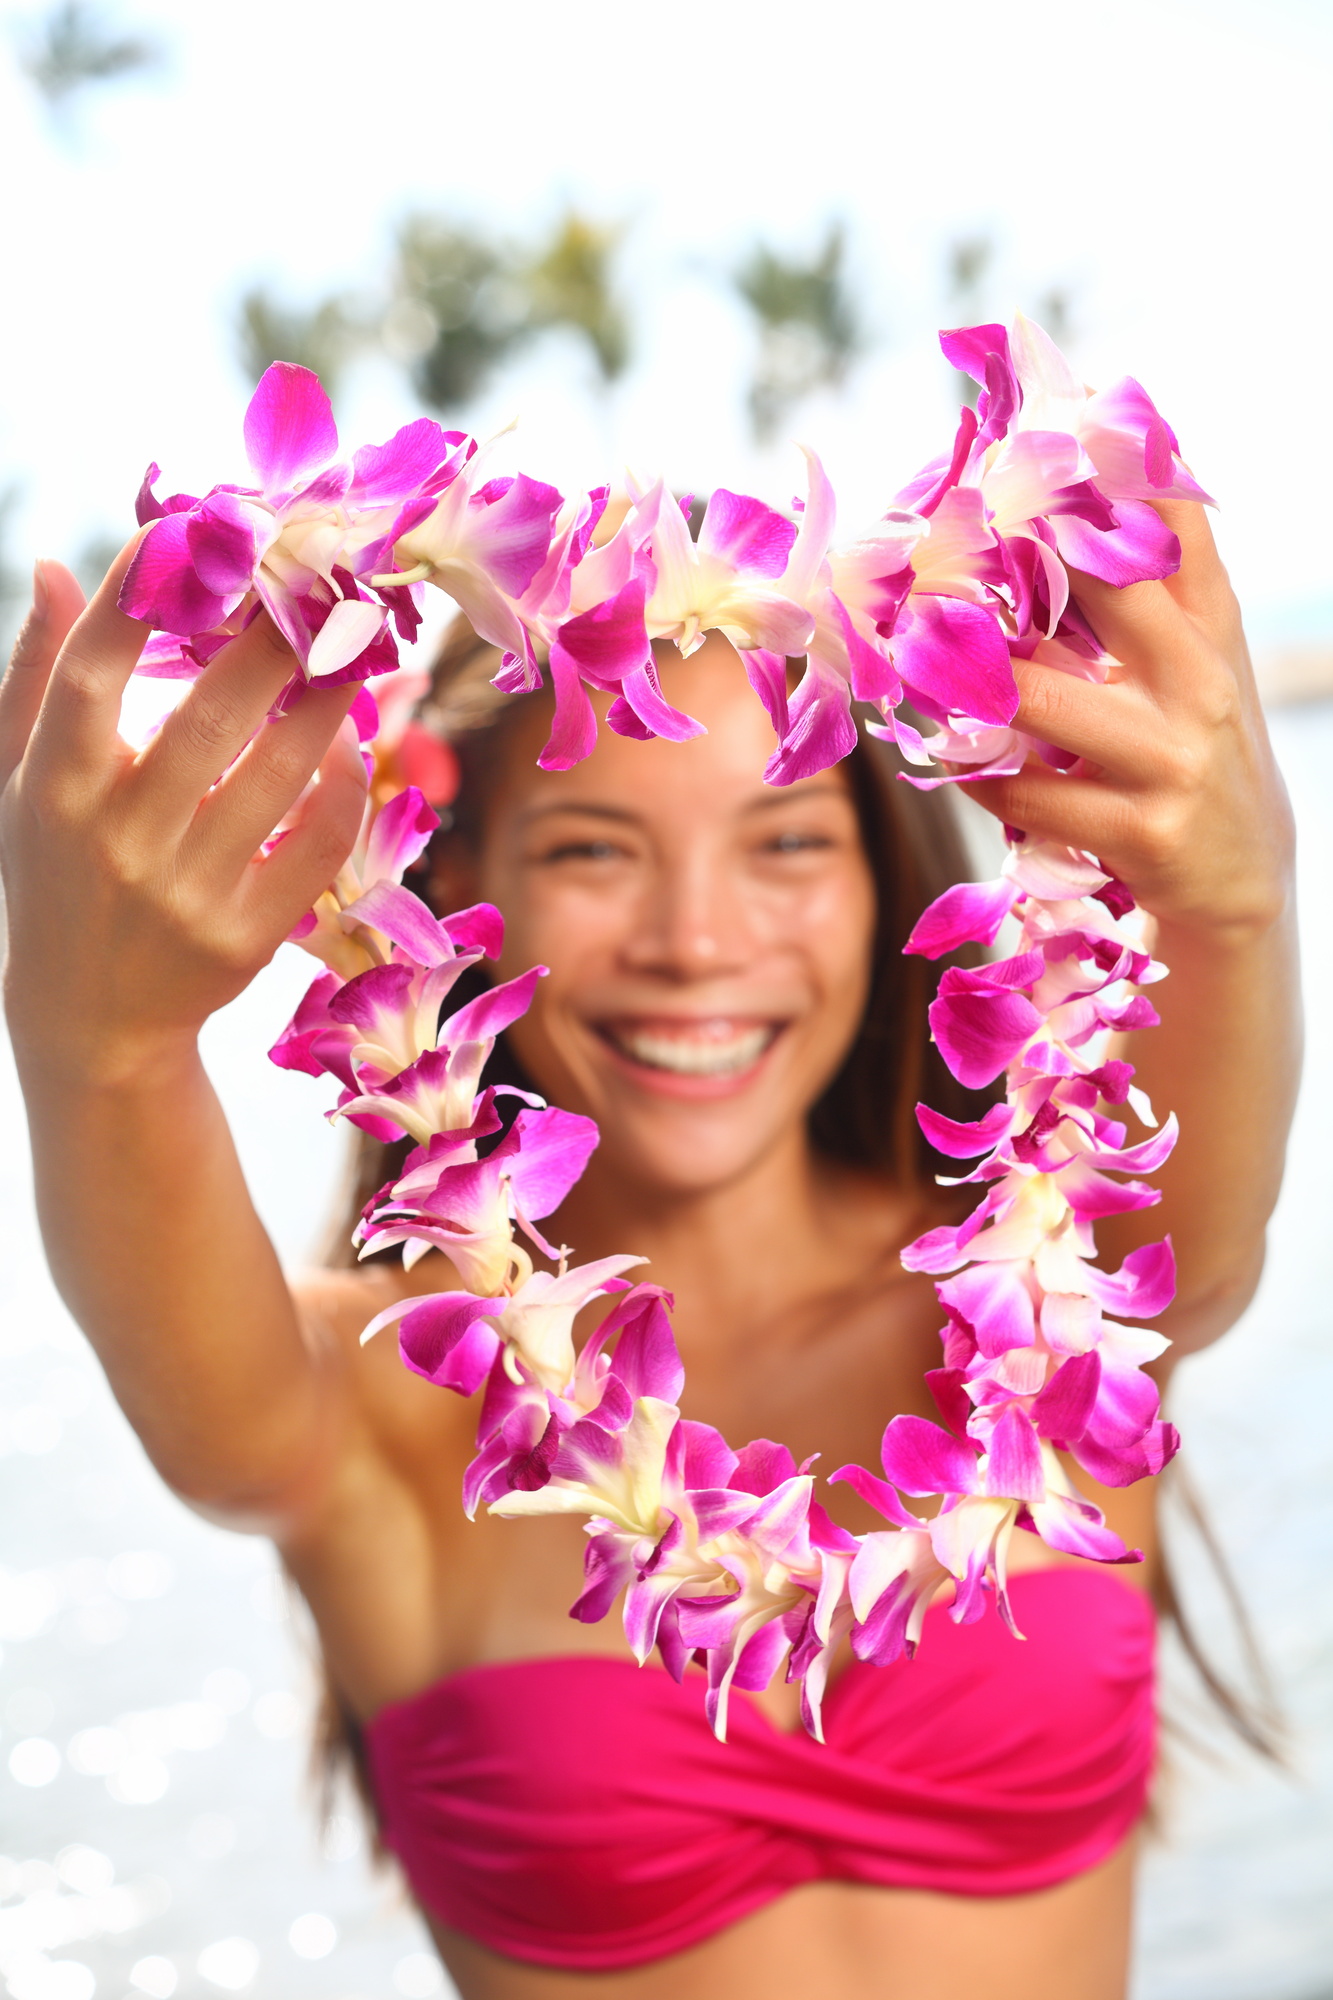 Hawaii Flowers Lei Necklace Made Orchid Flower Photos and Images |  Shutterstock